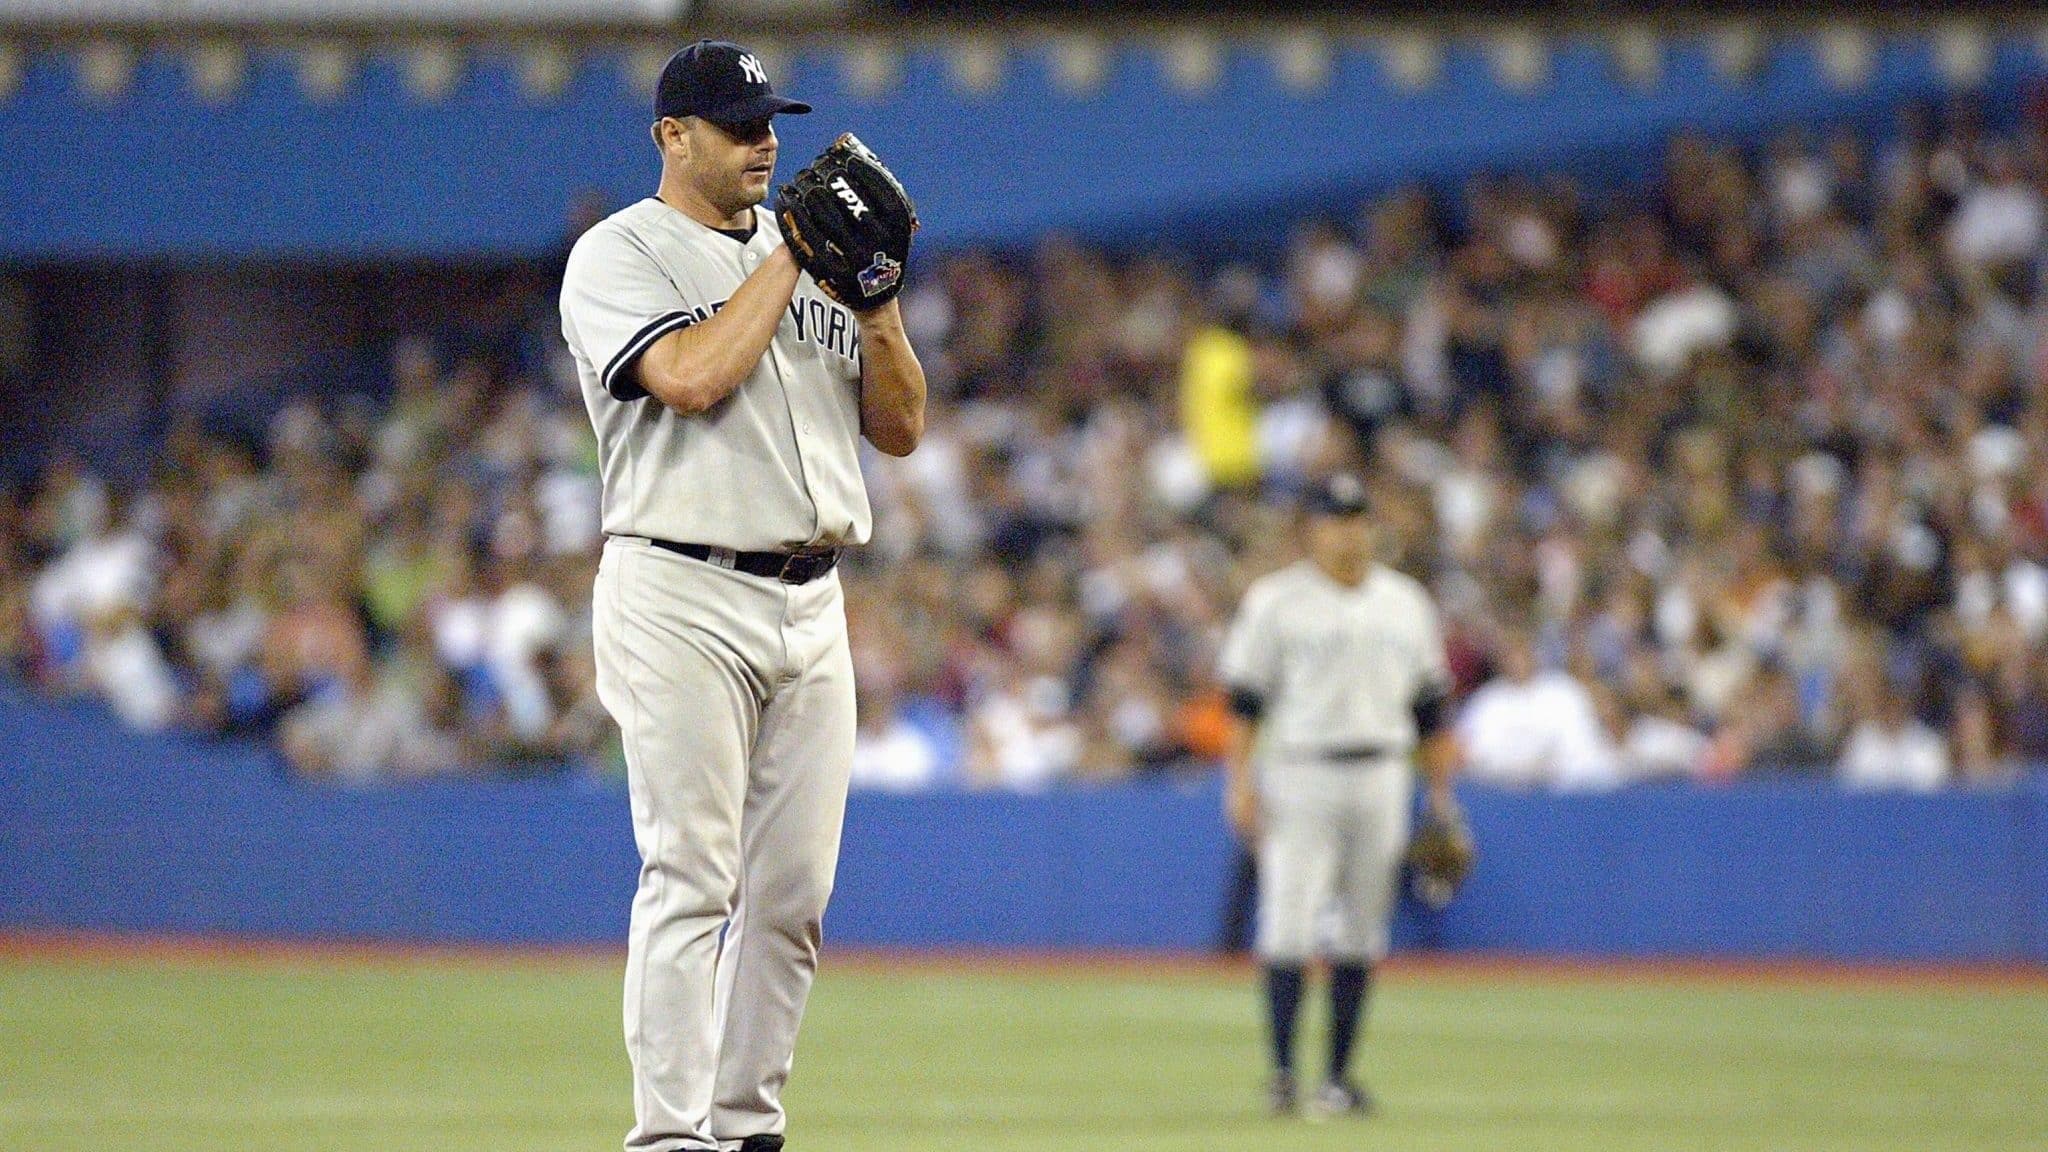 TORONTO - AUGUST 7: Roger Clemens #22 of the New York Yankees linesup the pitch during the game against the Toronto Blue Jays at the Rogers Centre August 7, 2007 in Toronto, Ontario.